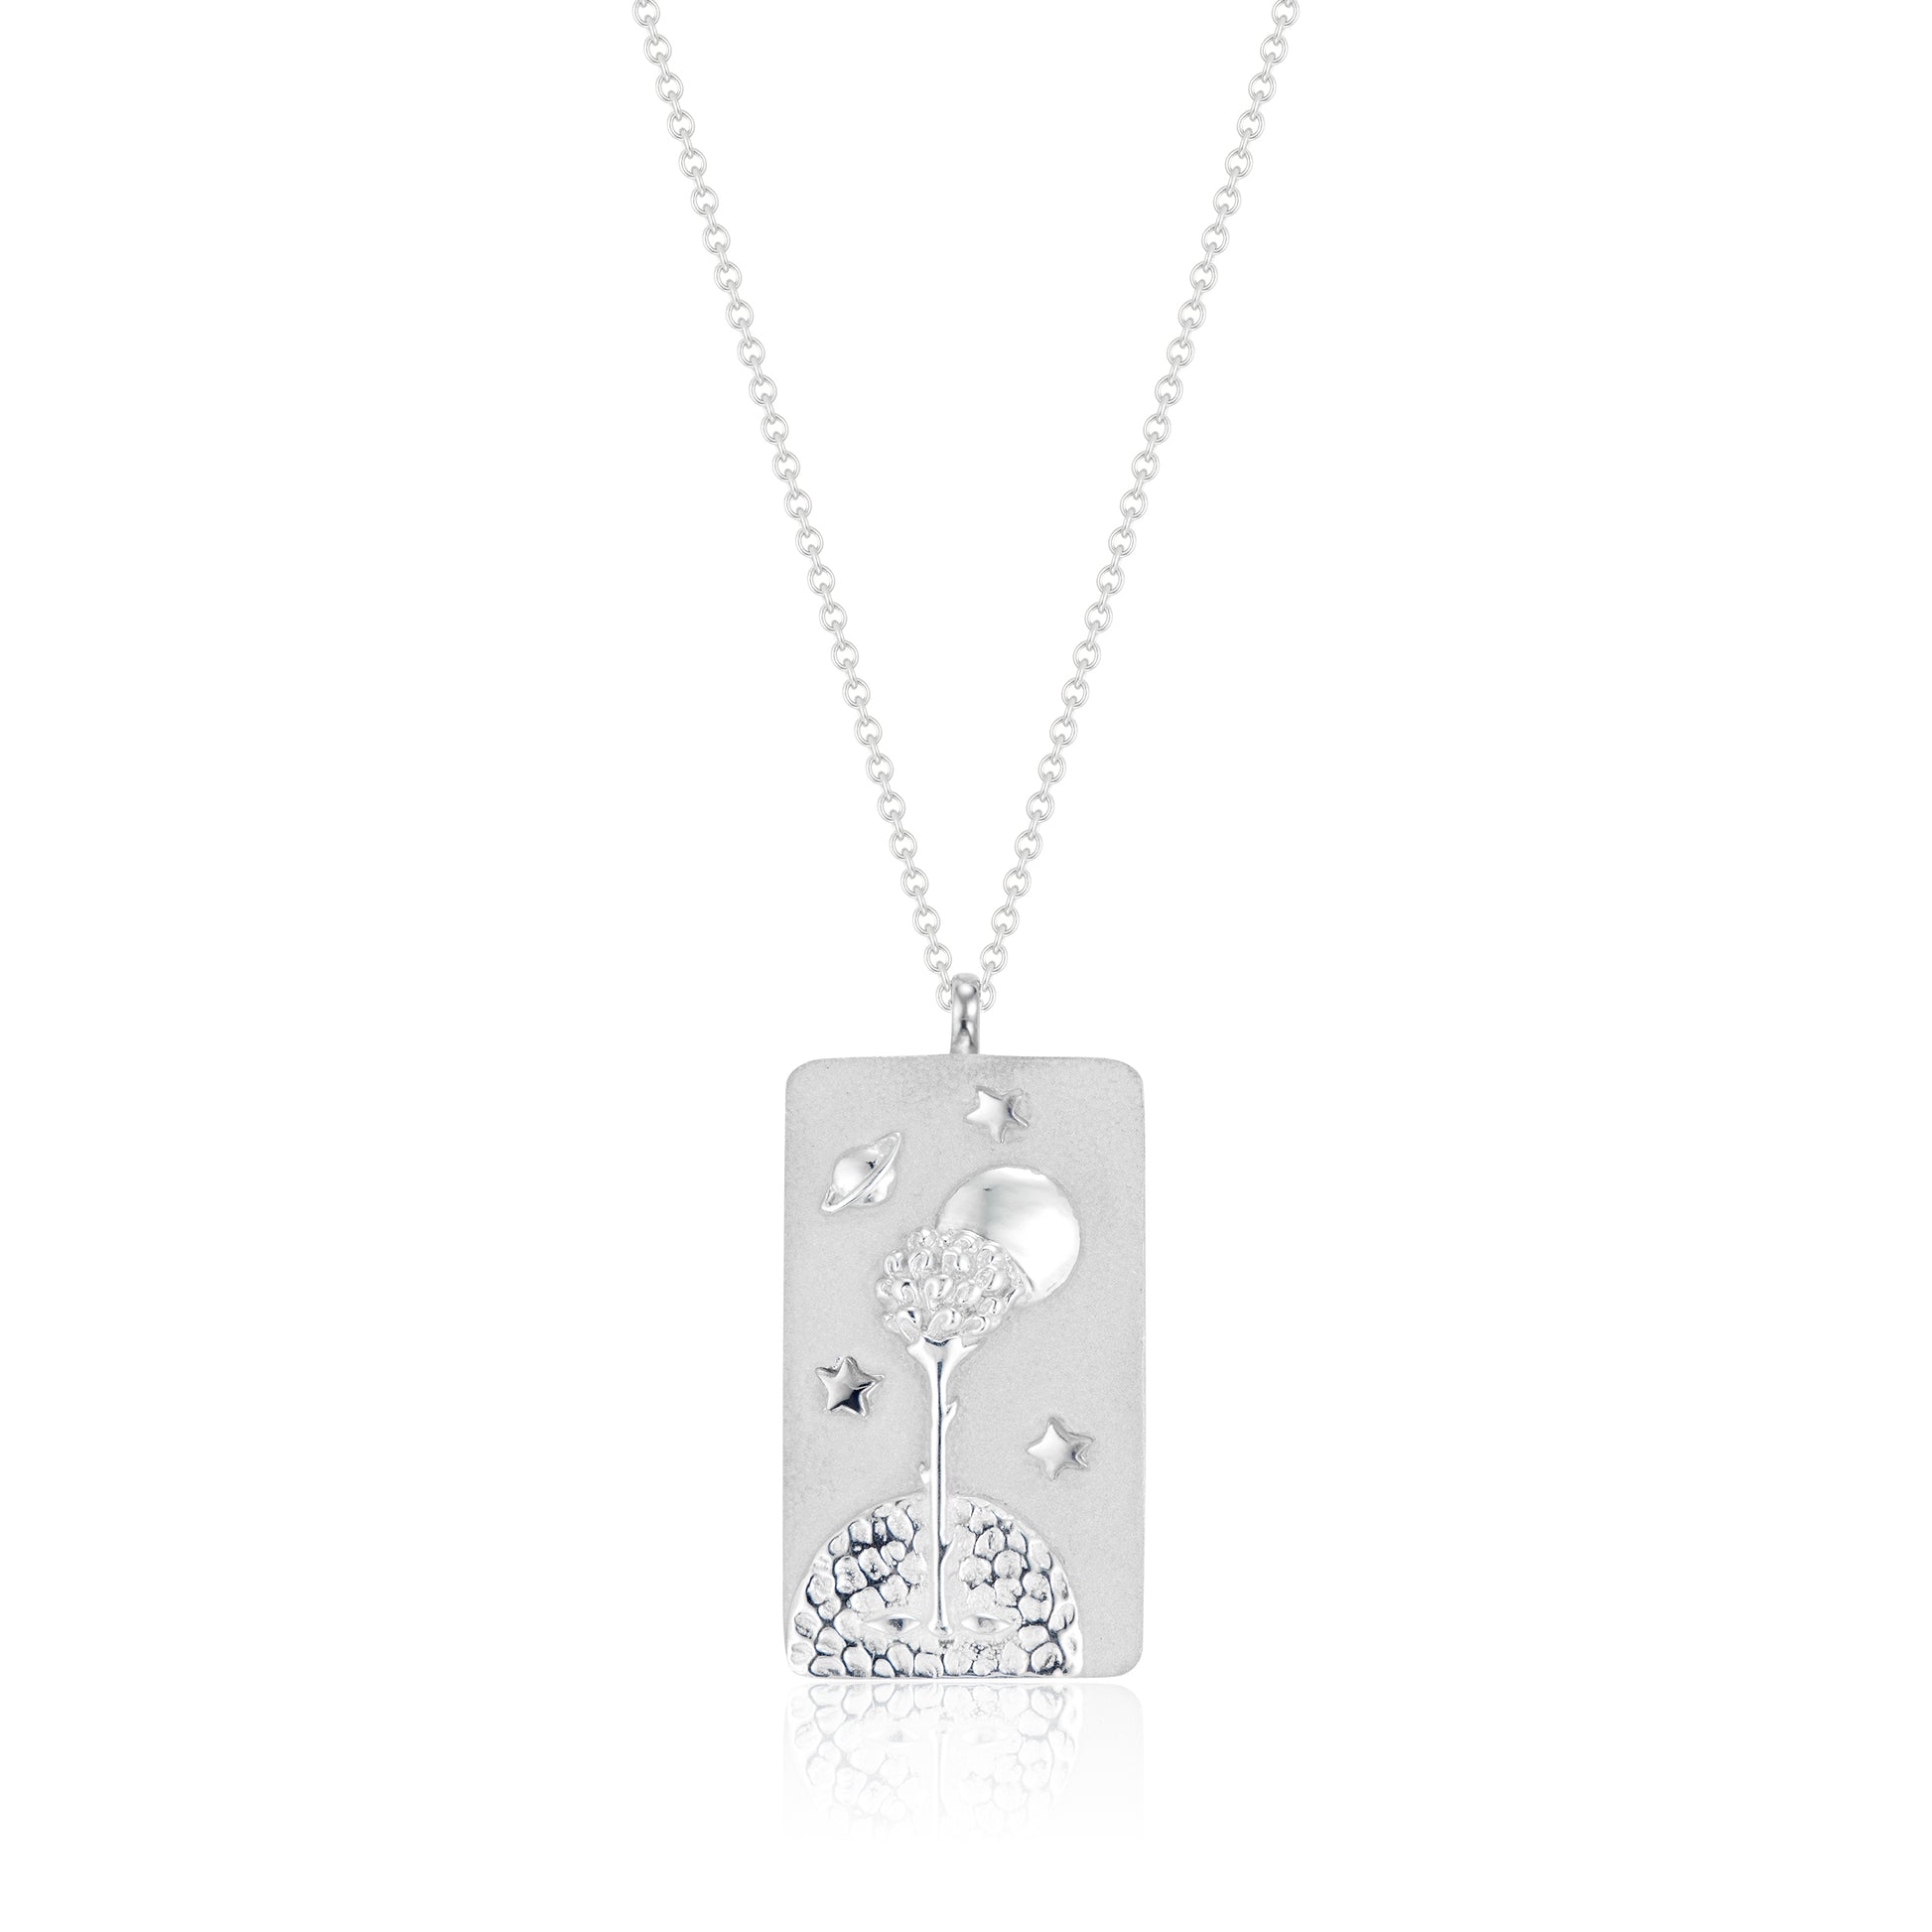 L'Amour Necklace from Serena Van Rensselaer x Le Petit Prince© Collection